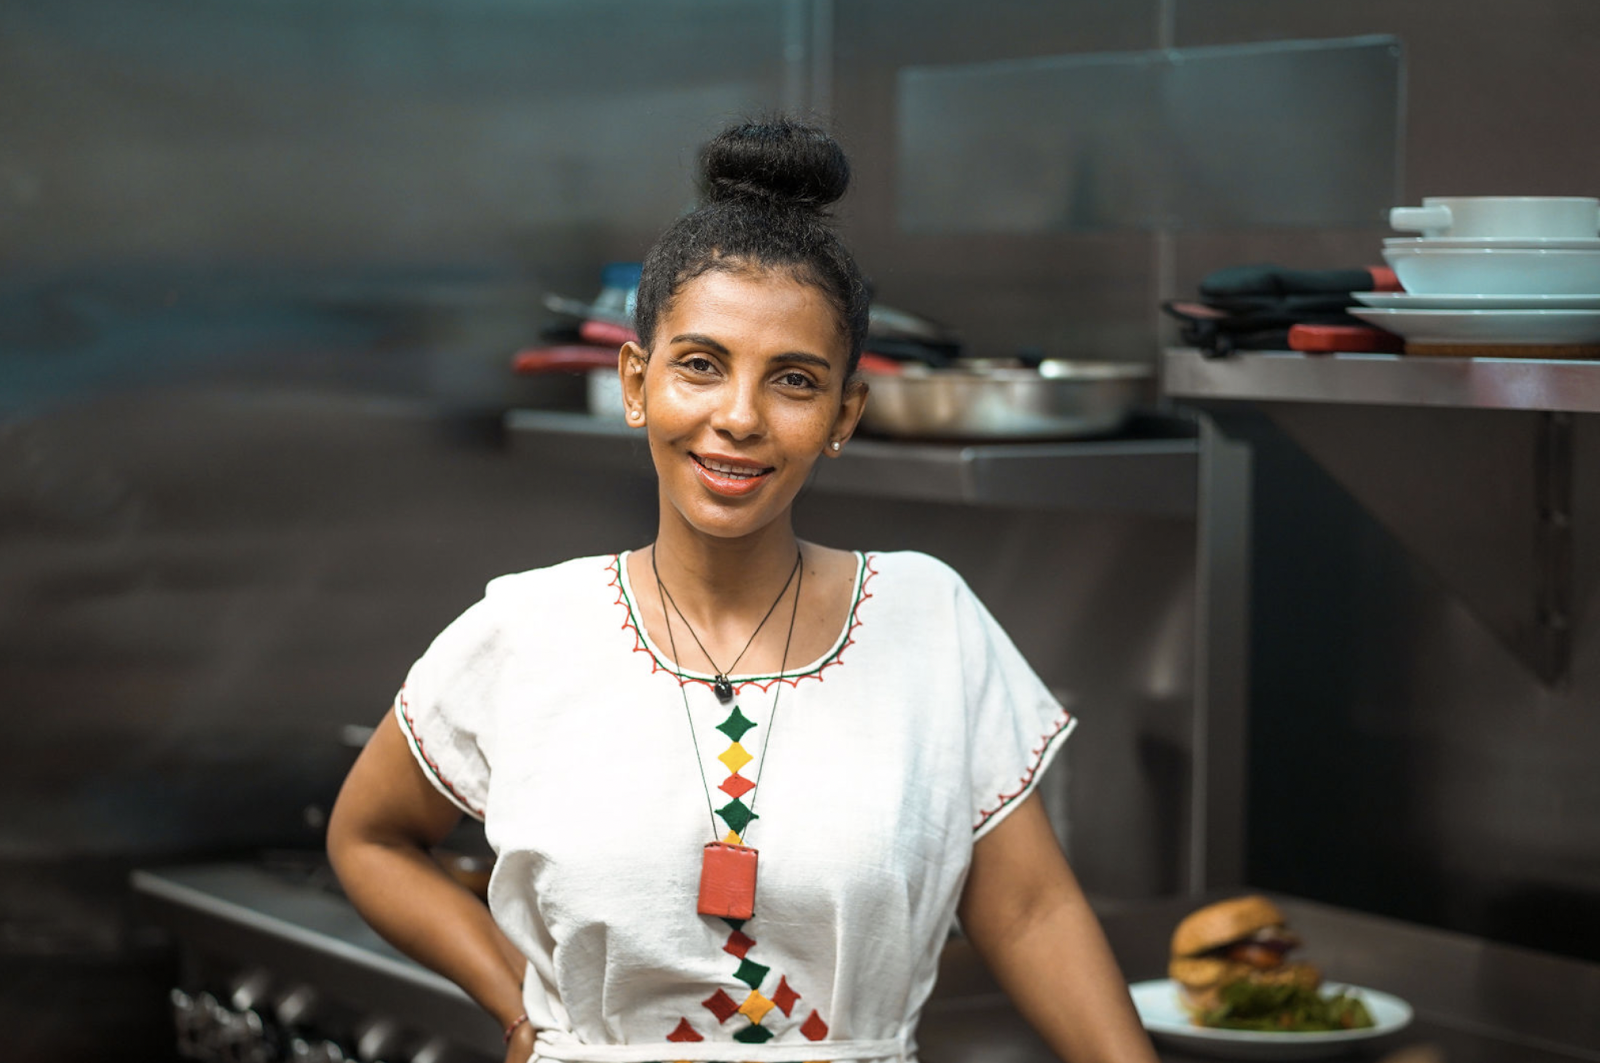 A chef in a white shirt smiles at the camera, hair up, inside of a kitchen.